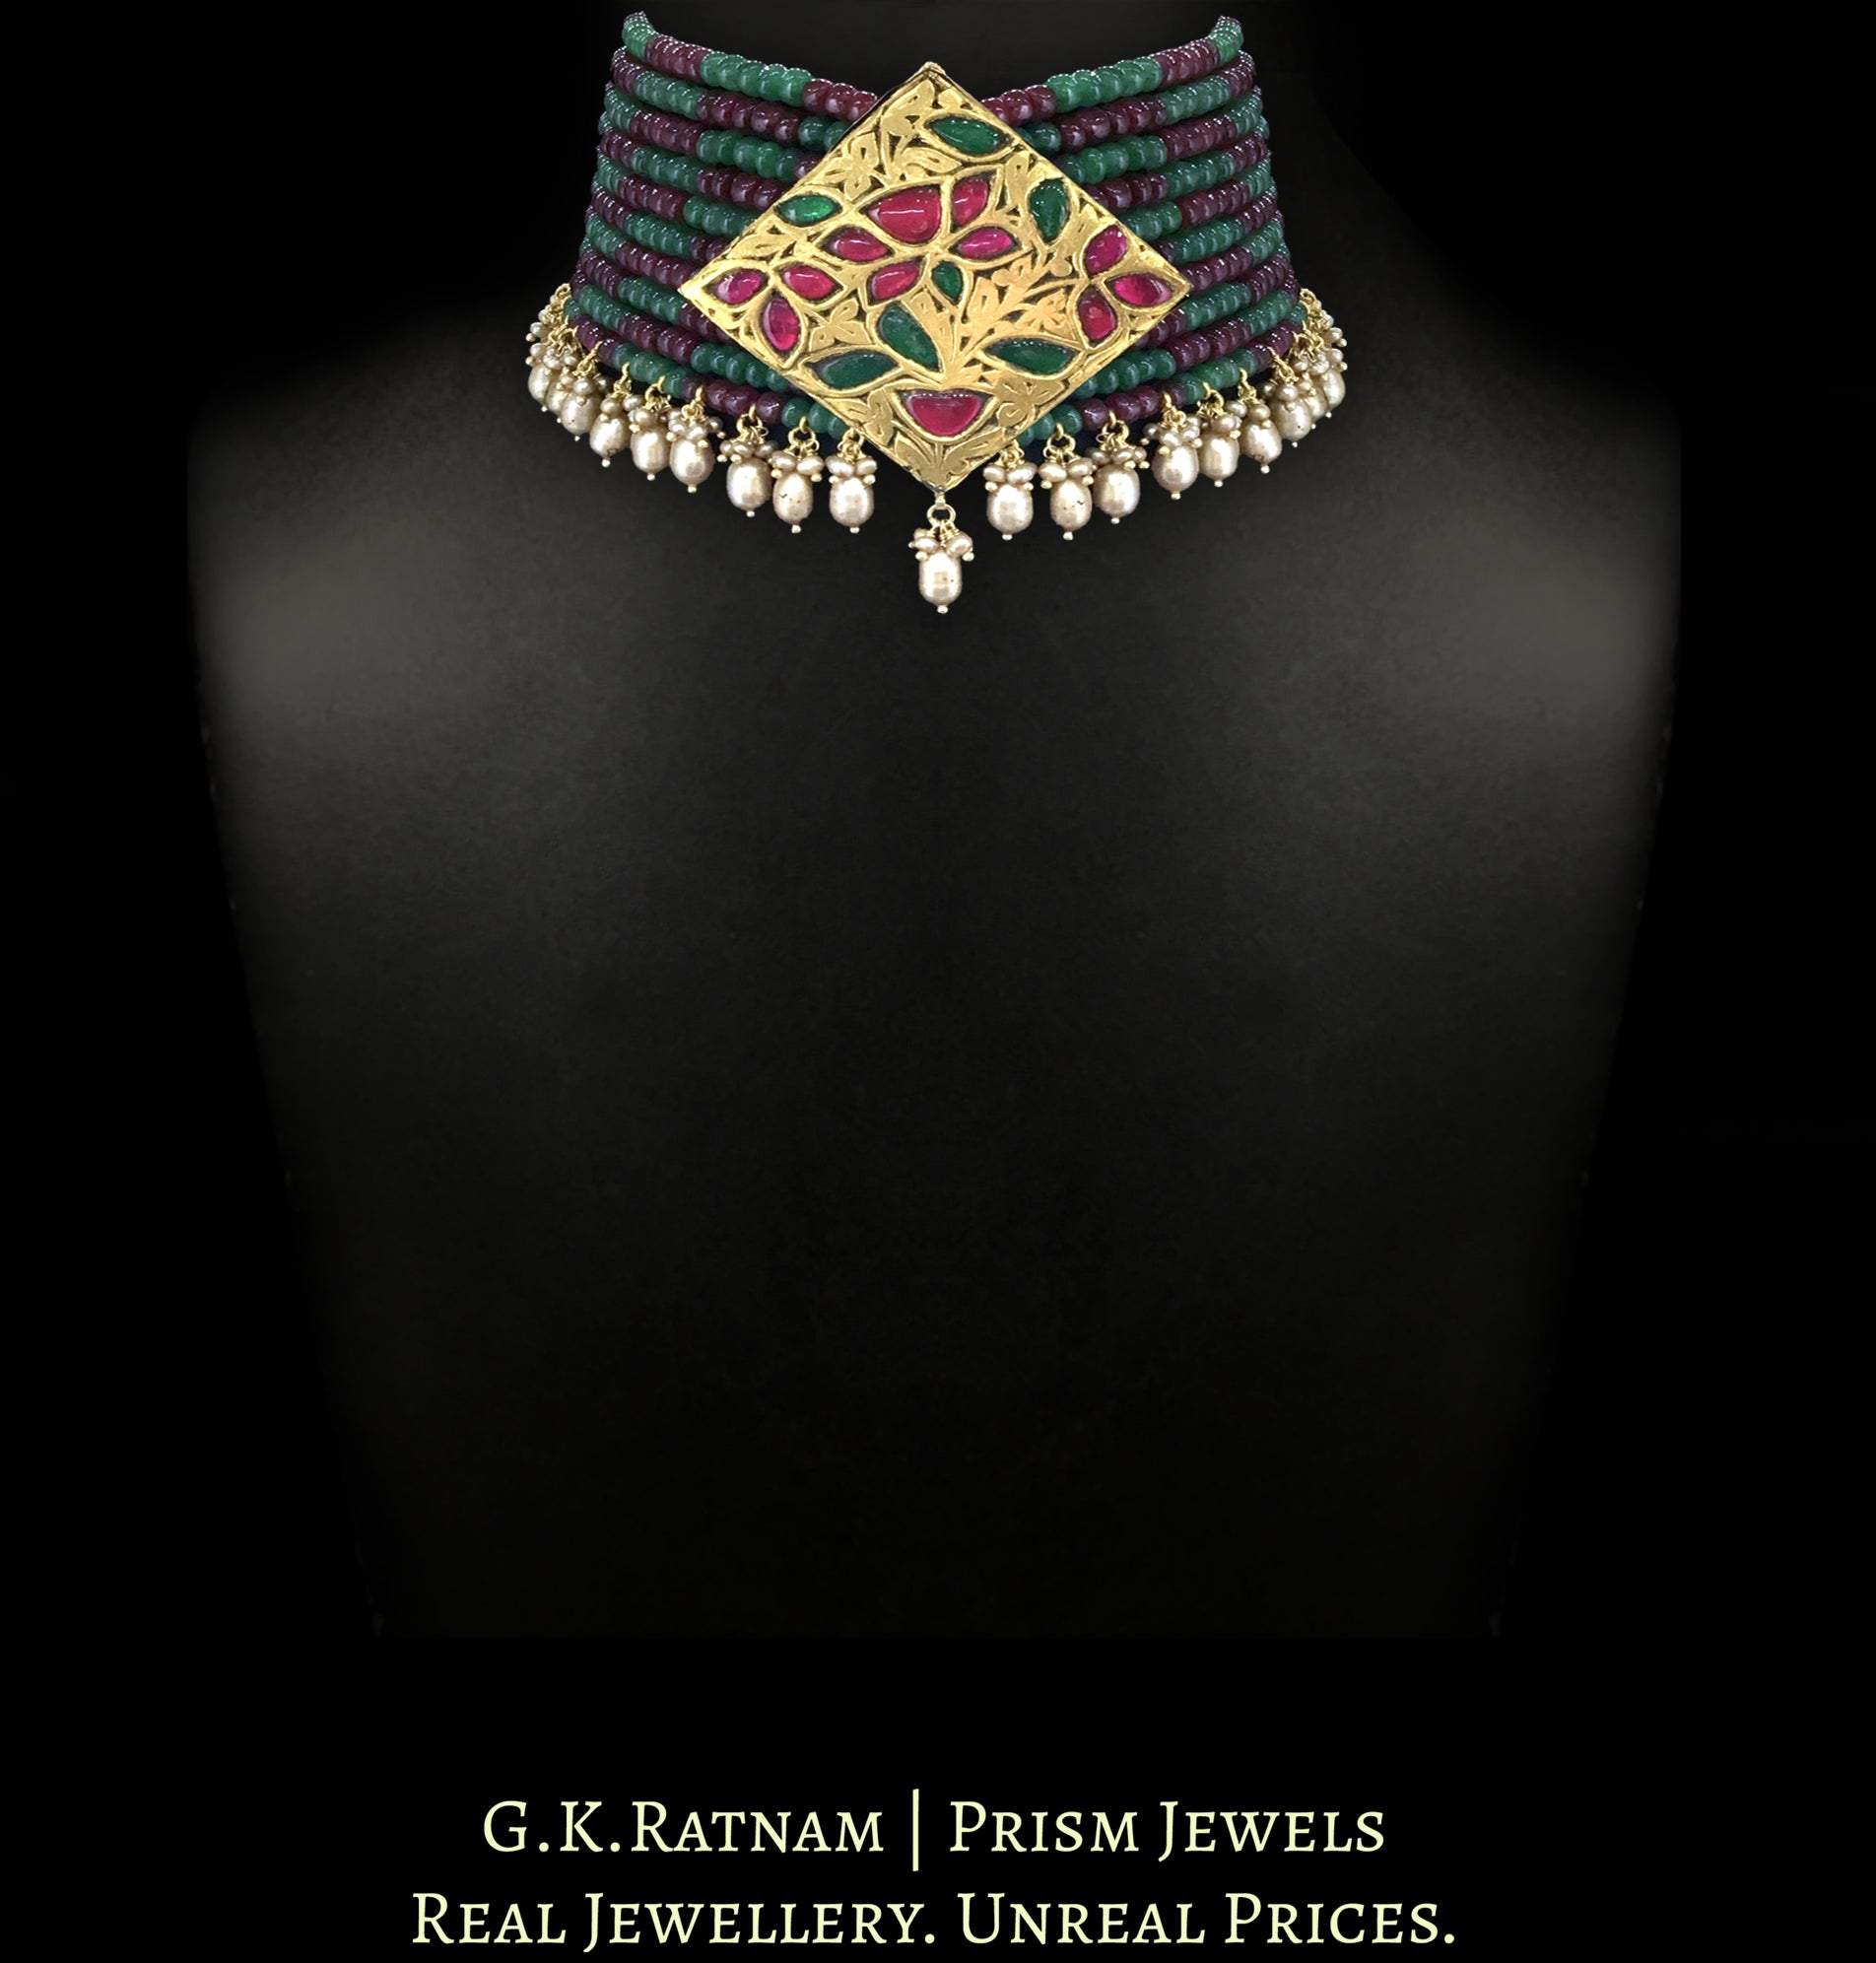 23k Gold and Diamond Polki kite-shaped Pendant Choker Necklace strung in Rubies, Beryls and Antiqued Hyderabadi Pearls